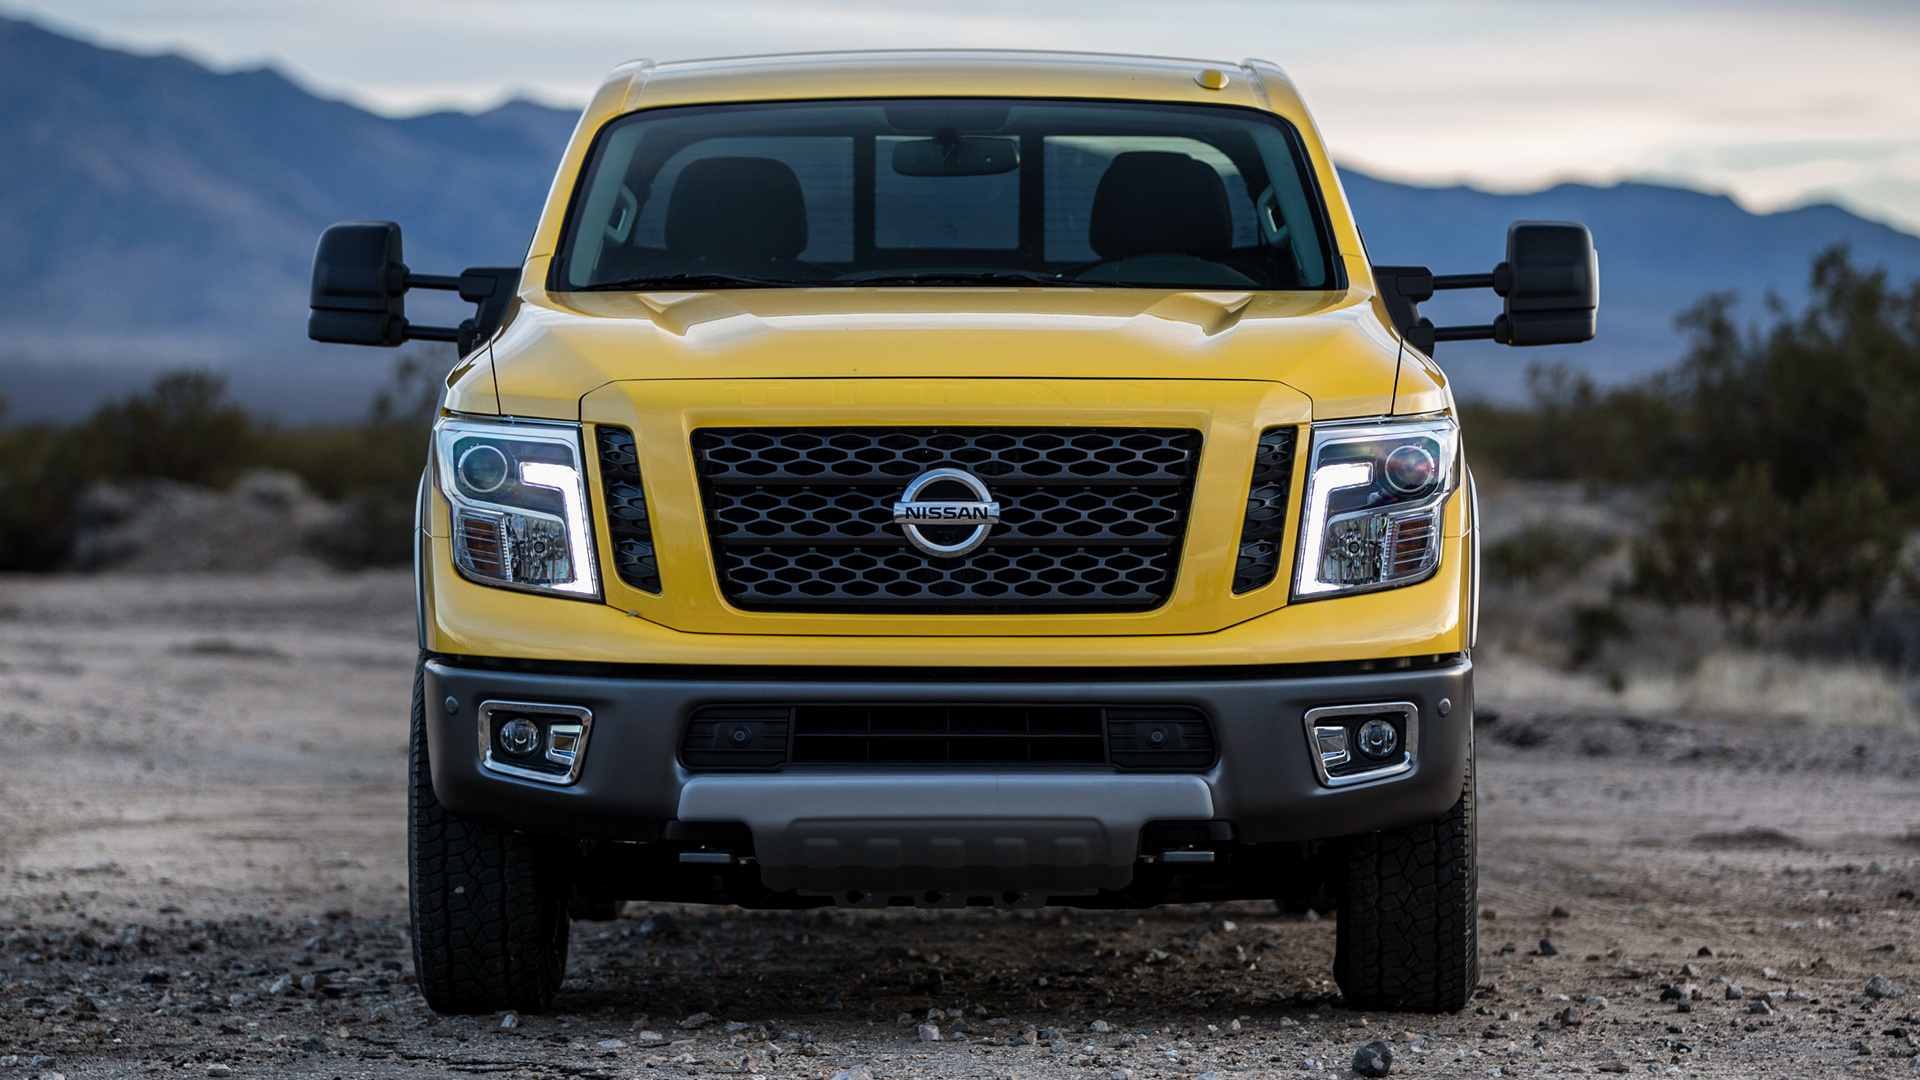 Nissan Titan, High-definition wallpapers, Off-road mastery, Unmatched power, 1920x1080 Full HD Desktop